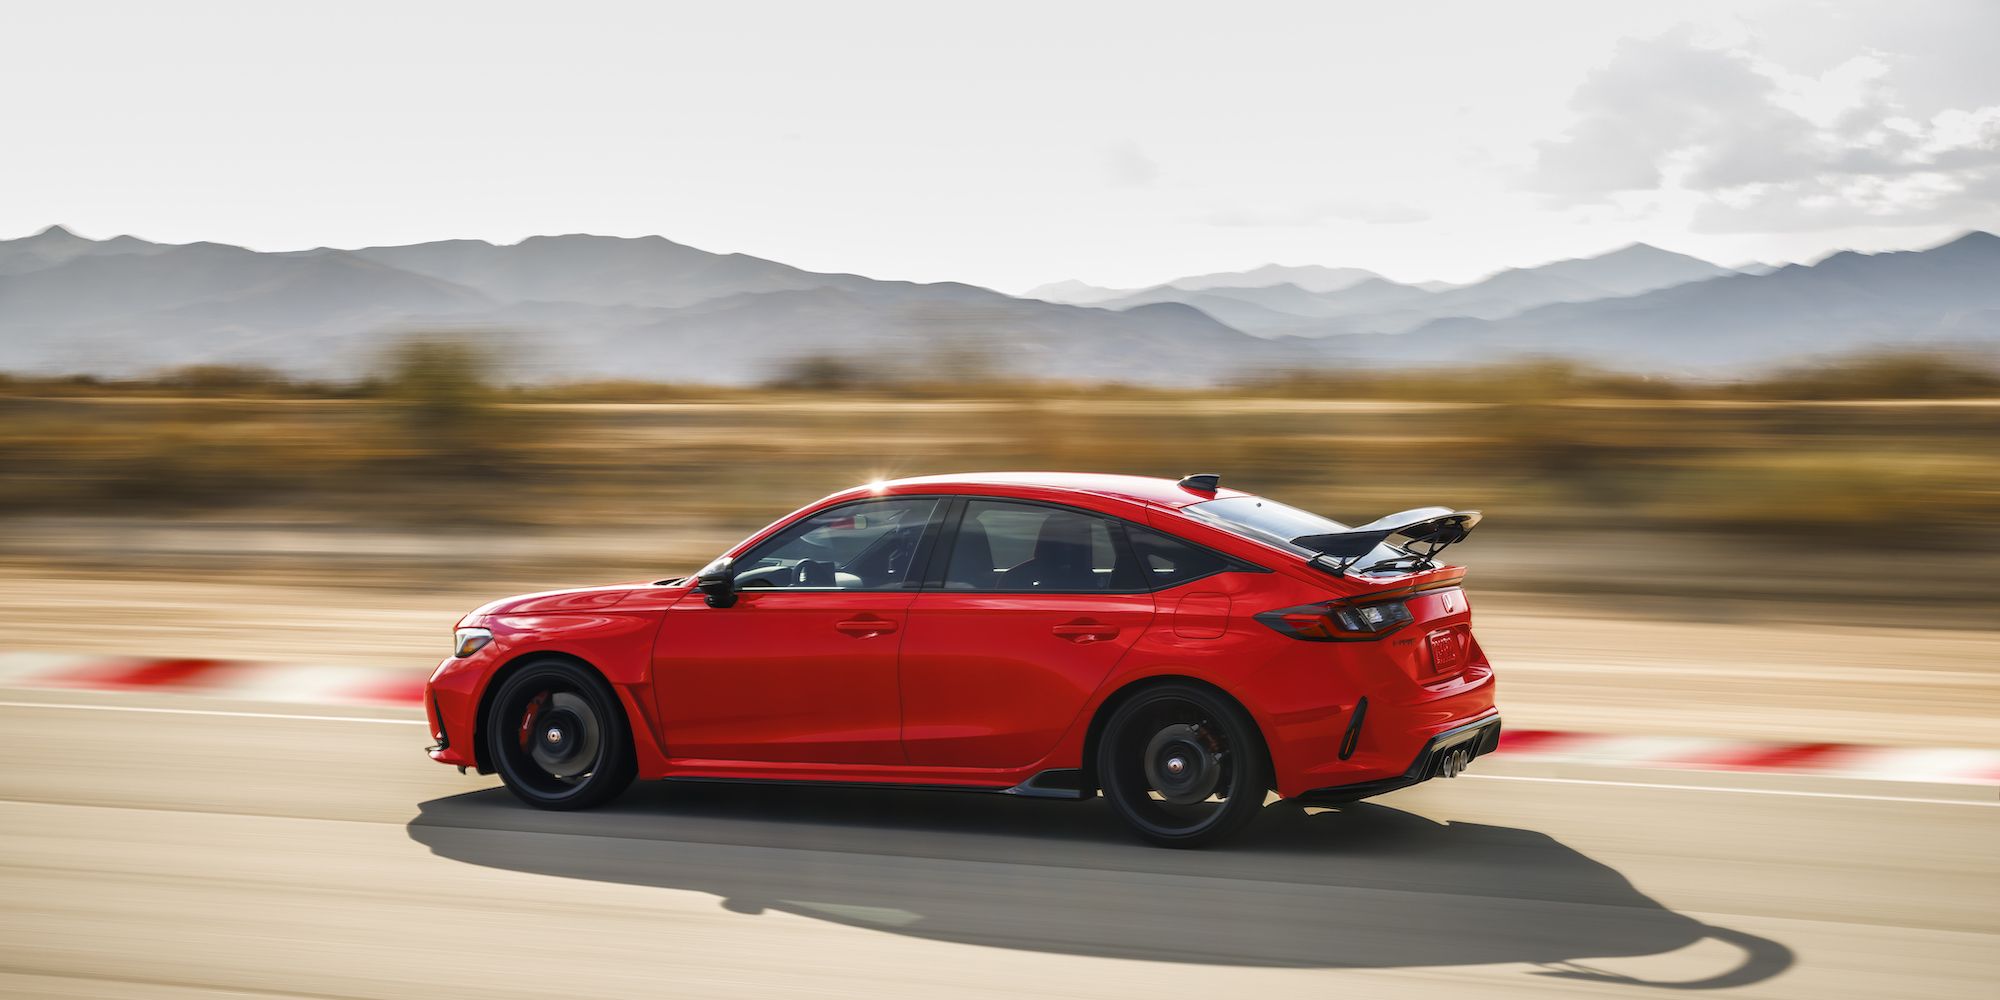 We Finally Know How Much Power the New Honda Civic Type R Makes